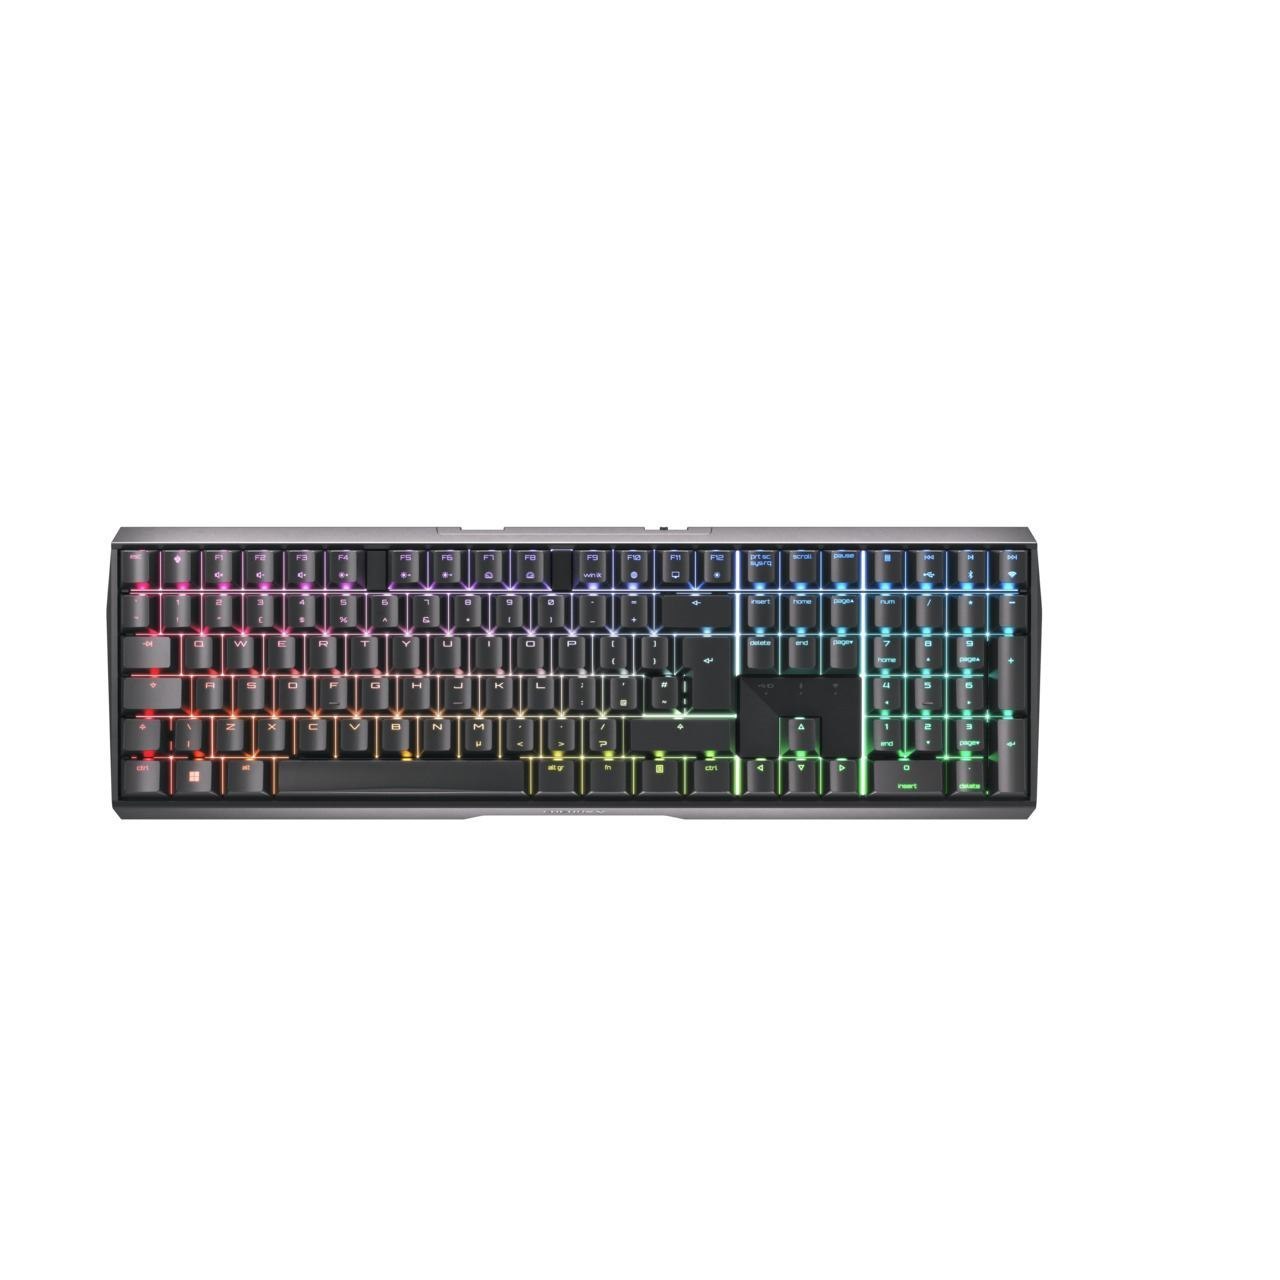 CHERRY MX 3.0S Gaming Keyboard - Wired/Wireless Connectivity - USB Type A Interface - RGB LED - English (UK) - Black